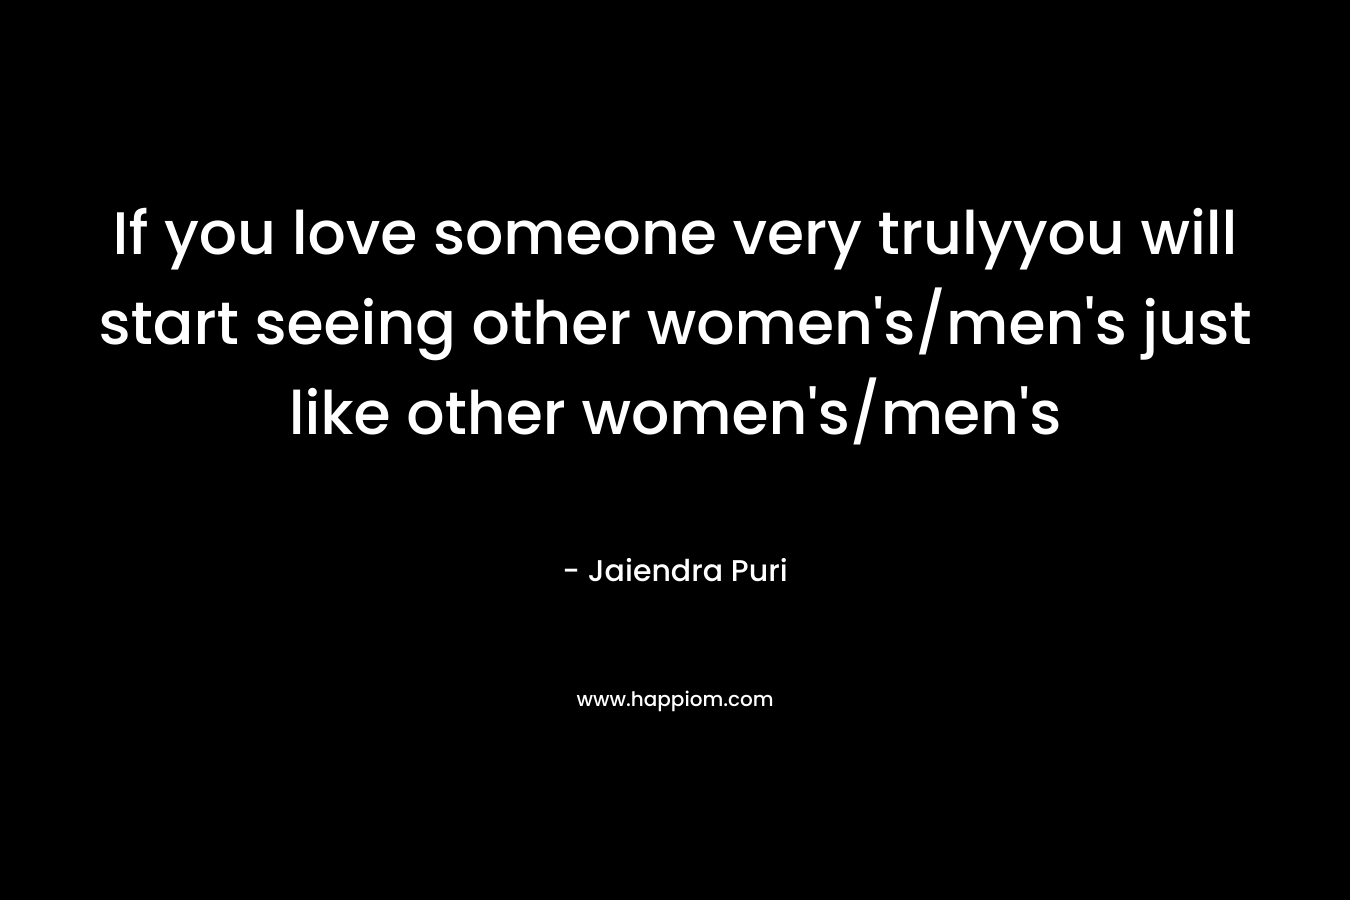 If you love someone very trulyyou will start seeing other women's/men's just like other women's/men's